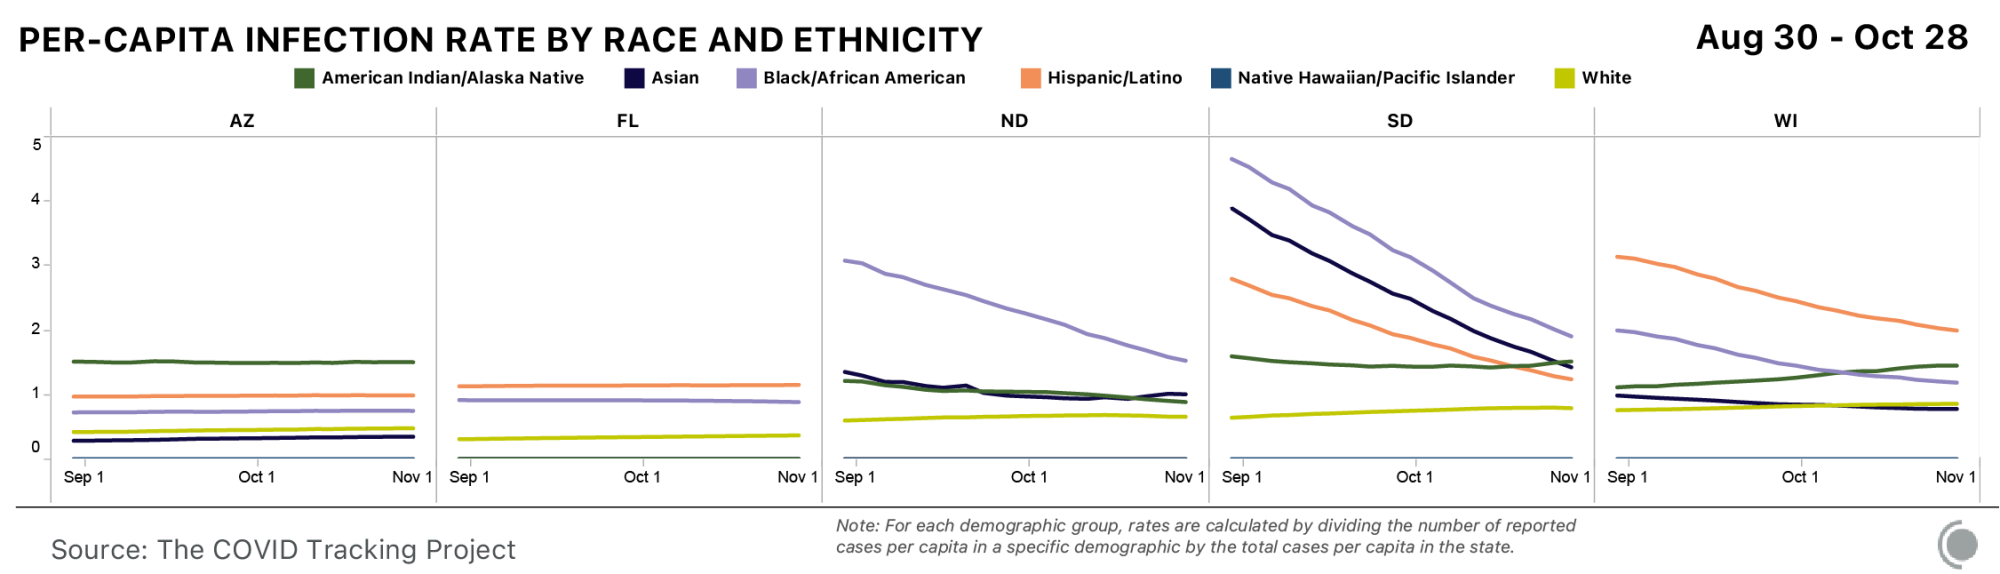 Per capita infection rate by race and ethnicity for Arizona, Florida, North Dakota, South Dakota, and Wisconsin. Per capita infections have generally decreased for Black, Latinx, and Asian people. Data is from August 30 through October 28.